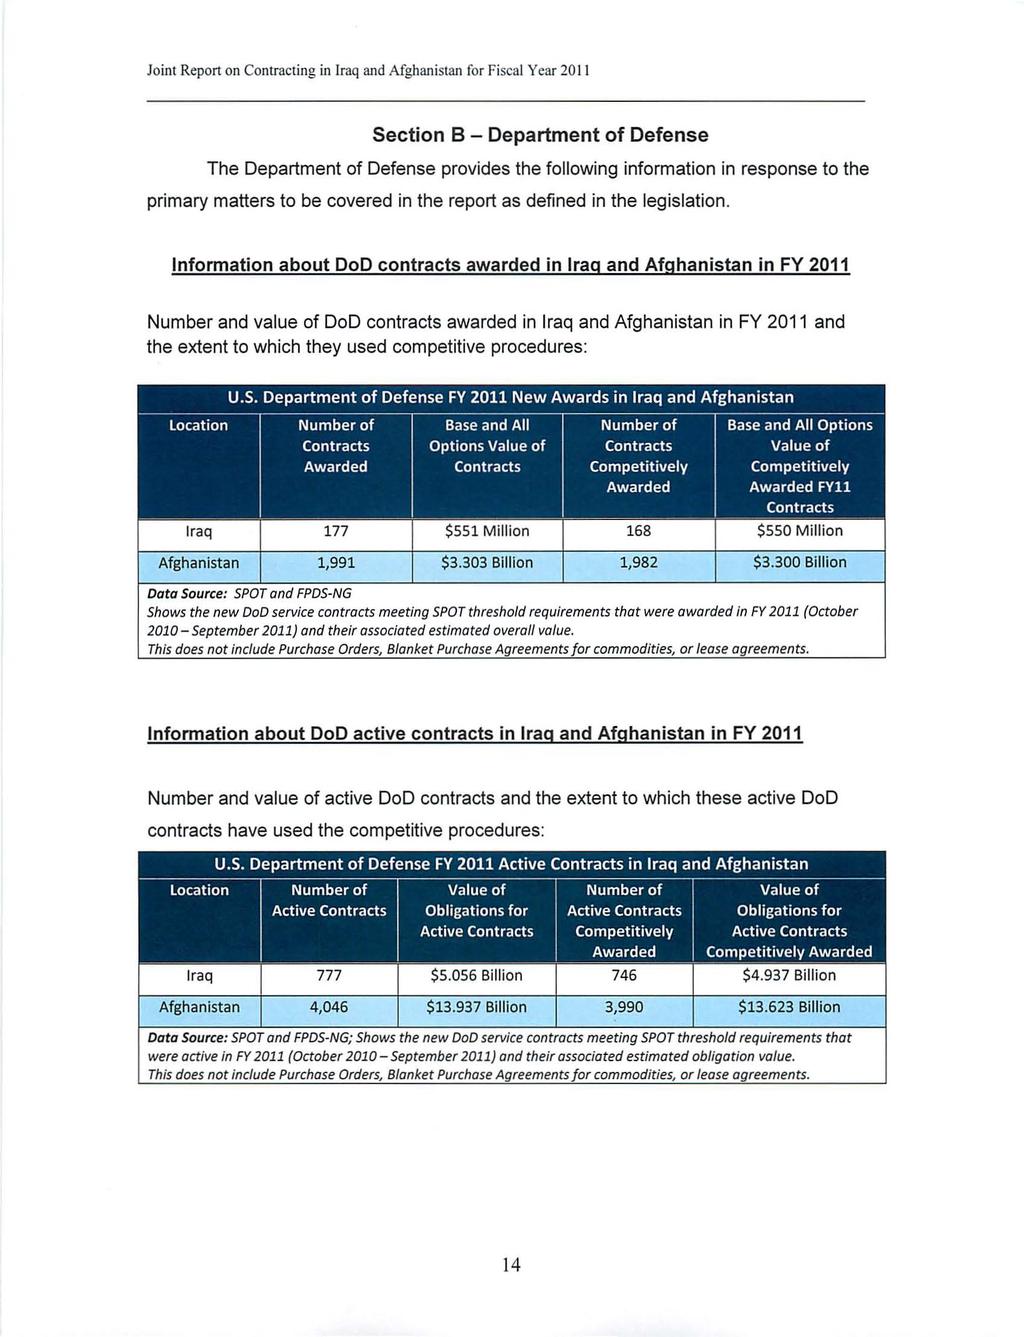 Joint Report on Contracting in Iraq and Afghanistan for Fiscal Y car 20 II Section B - Department of Defense The Department of Defense provides the following information in response to the primary